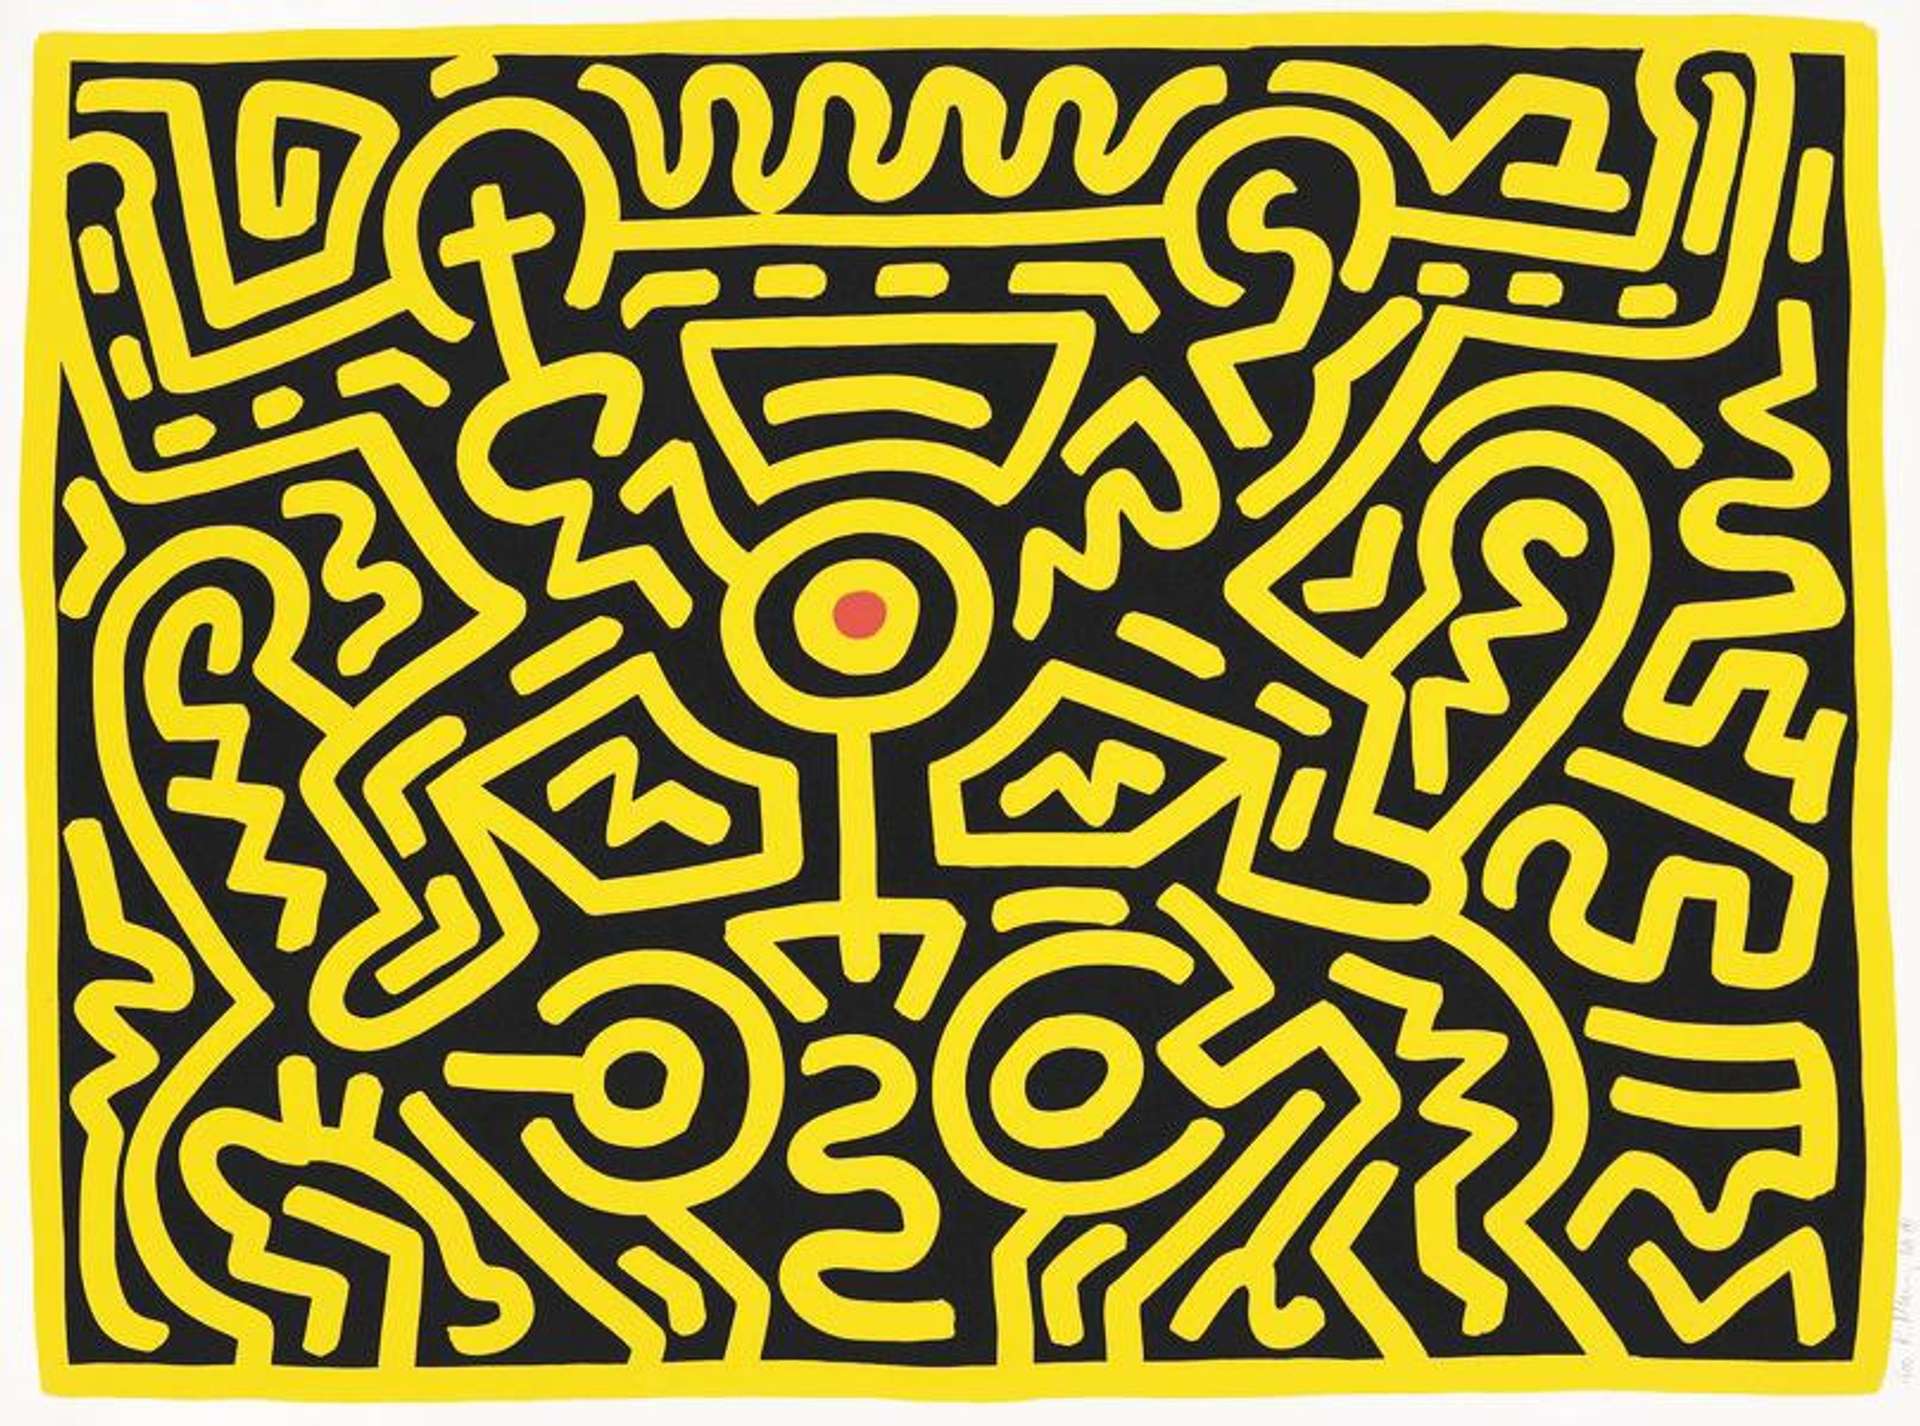 Keith Haring’s Growing 3. A Pop Art screenprint of a pattern of yellow lines and figures against a black background with one red polka dot in the centre.